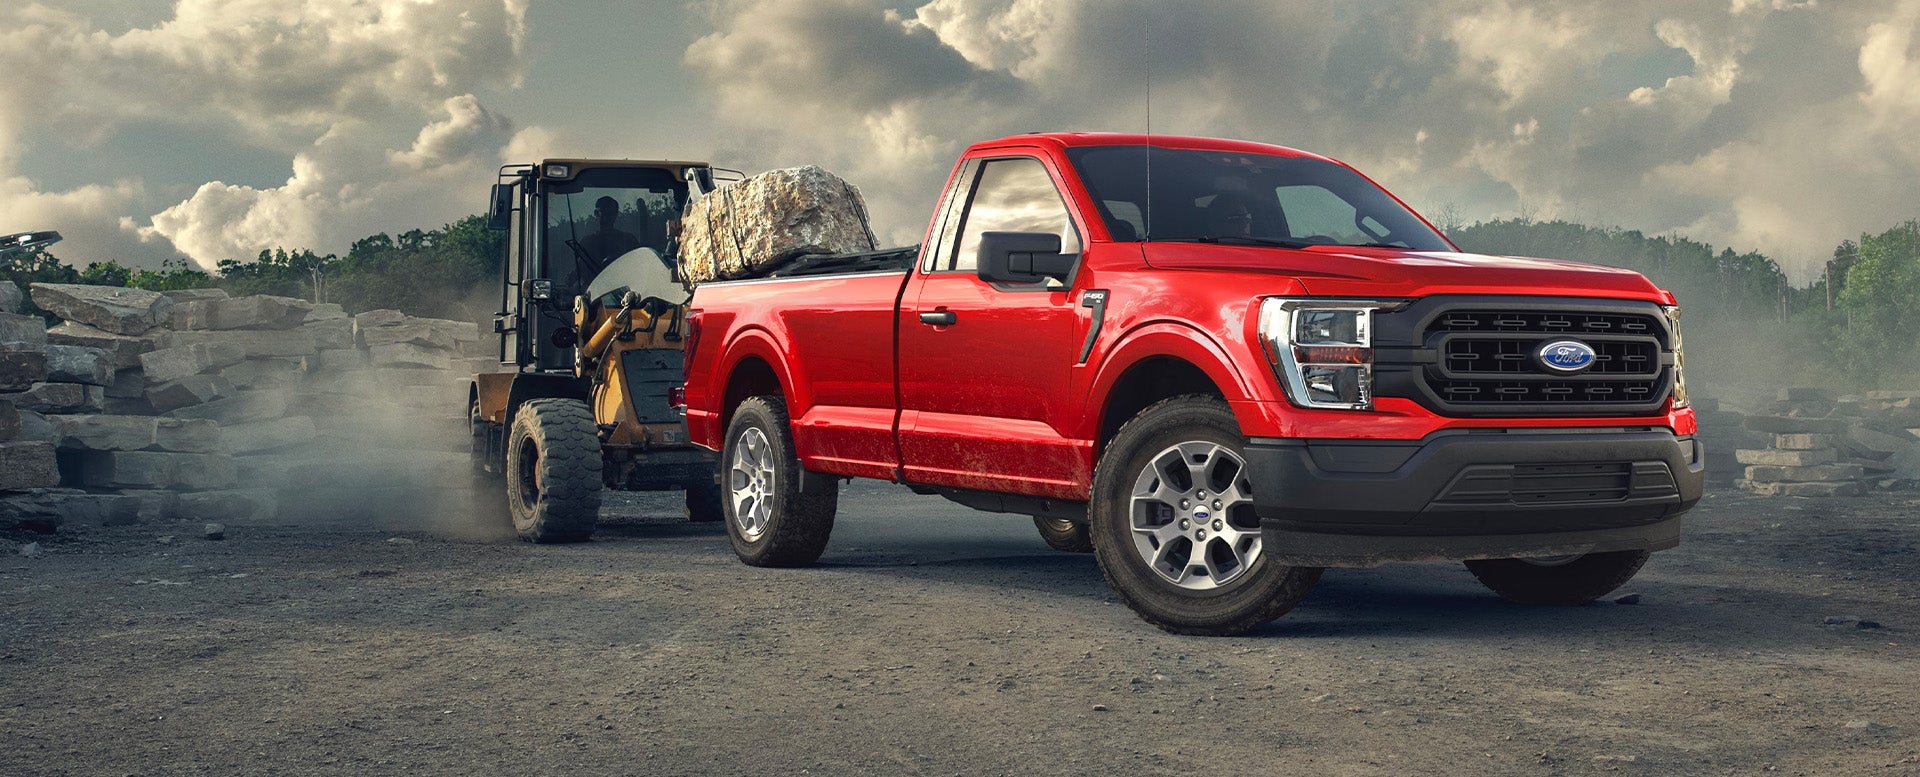 Ford F150 towing capacity